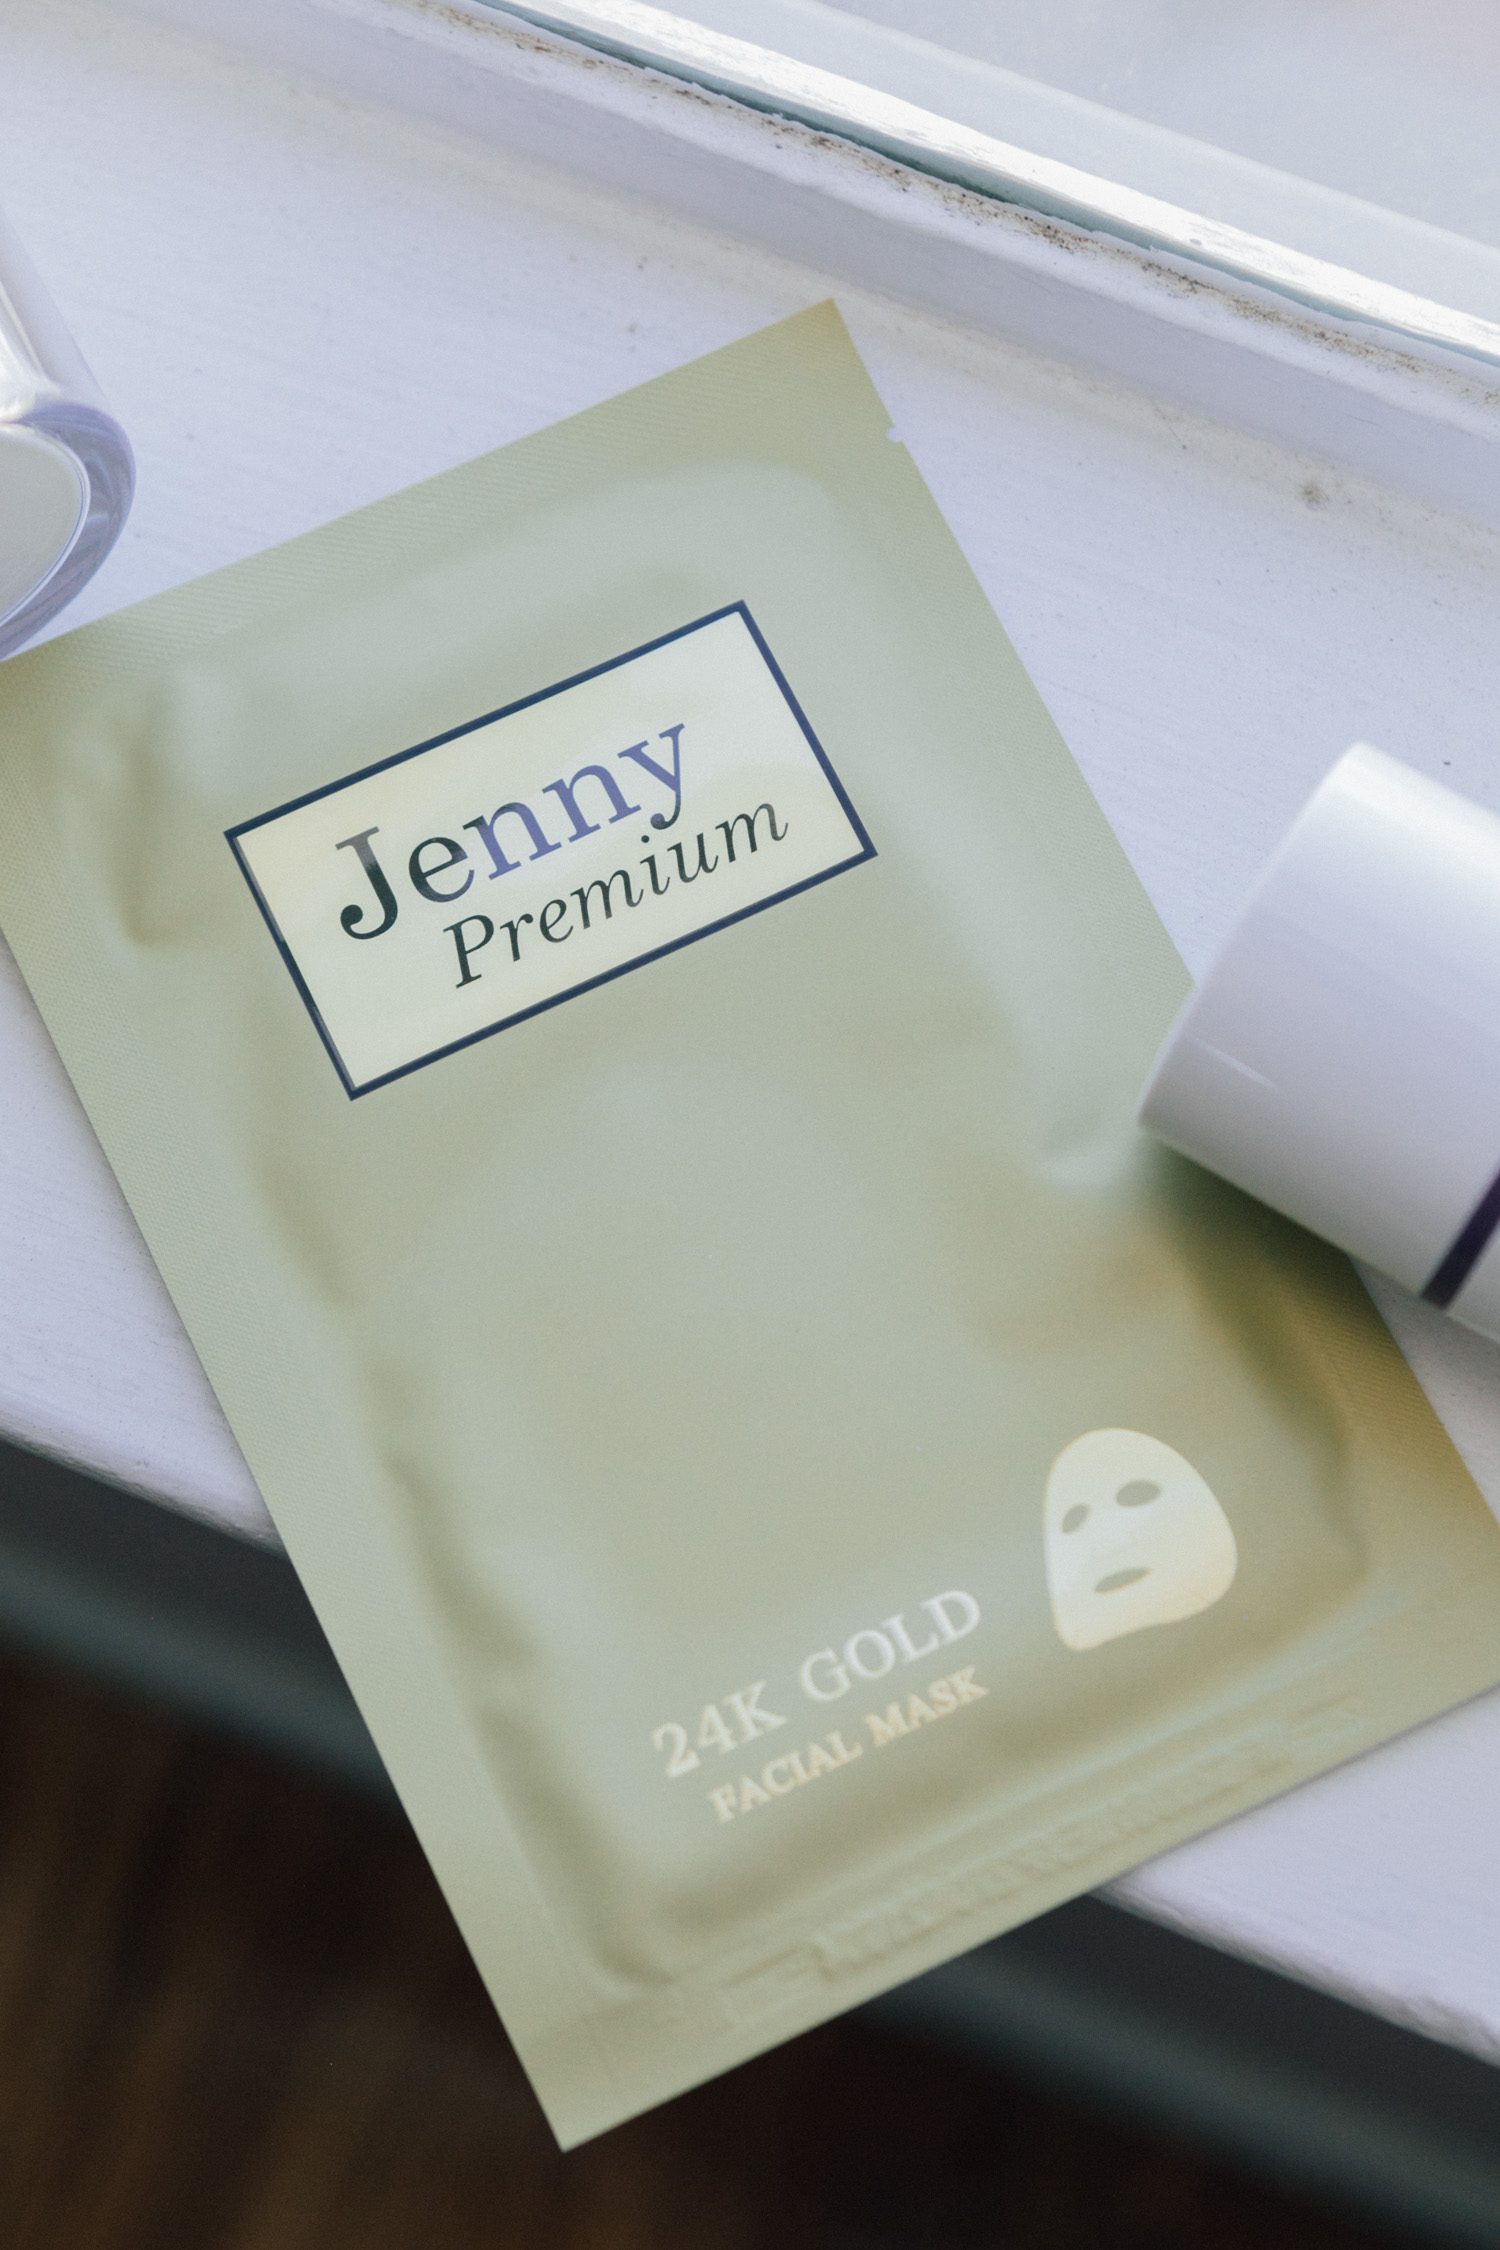 Jenny premium is one of the skincare products